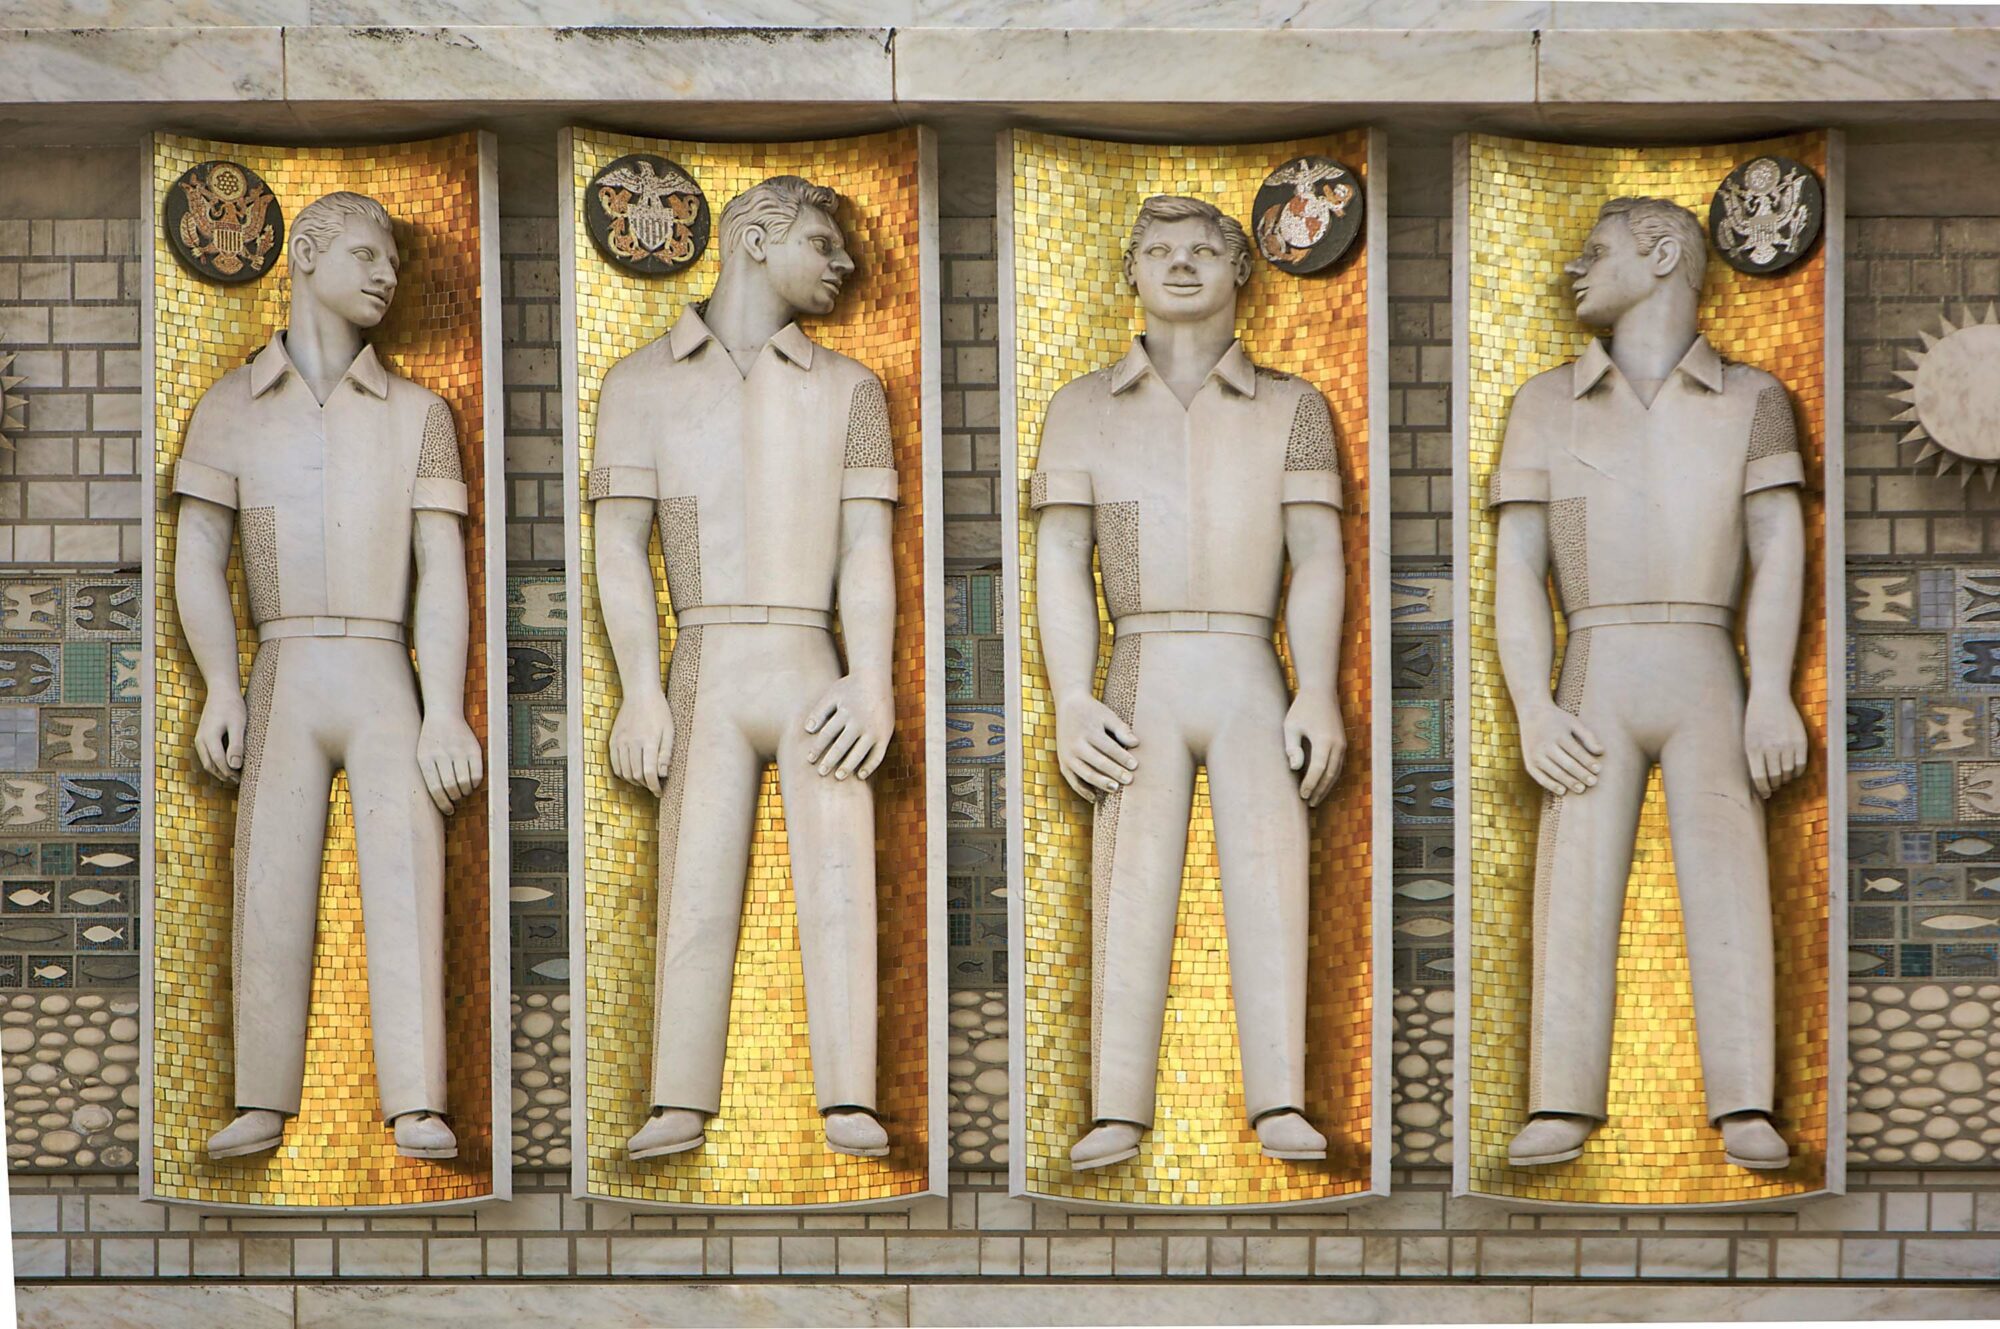 Exterior view of the Emile Norman memorial frieze, depicting members of the armed forces, on the northern face of the California Masonic Memorial Temple in San Francisco.